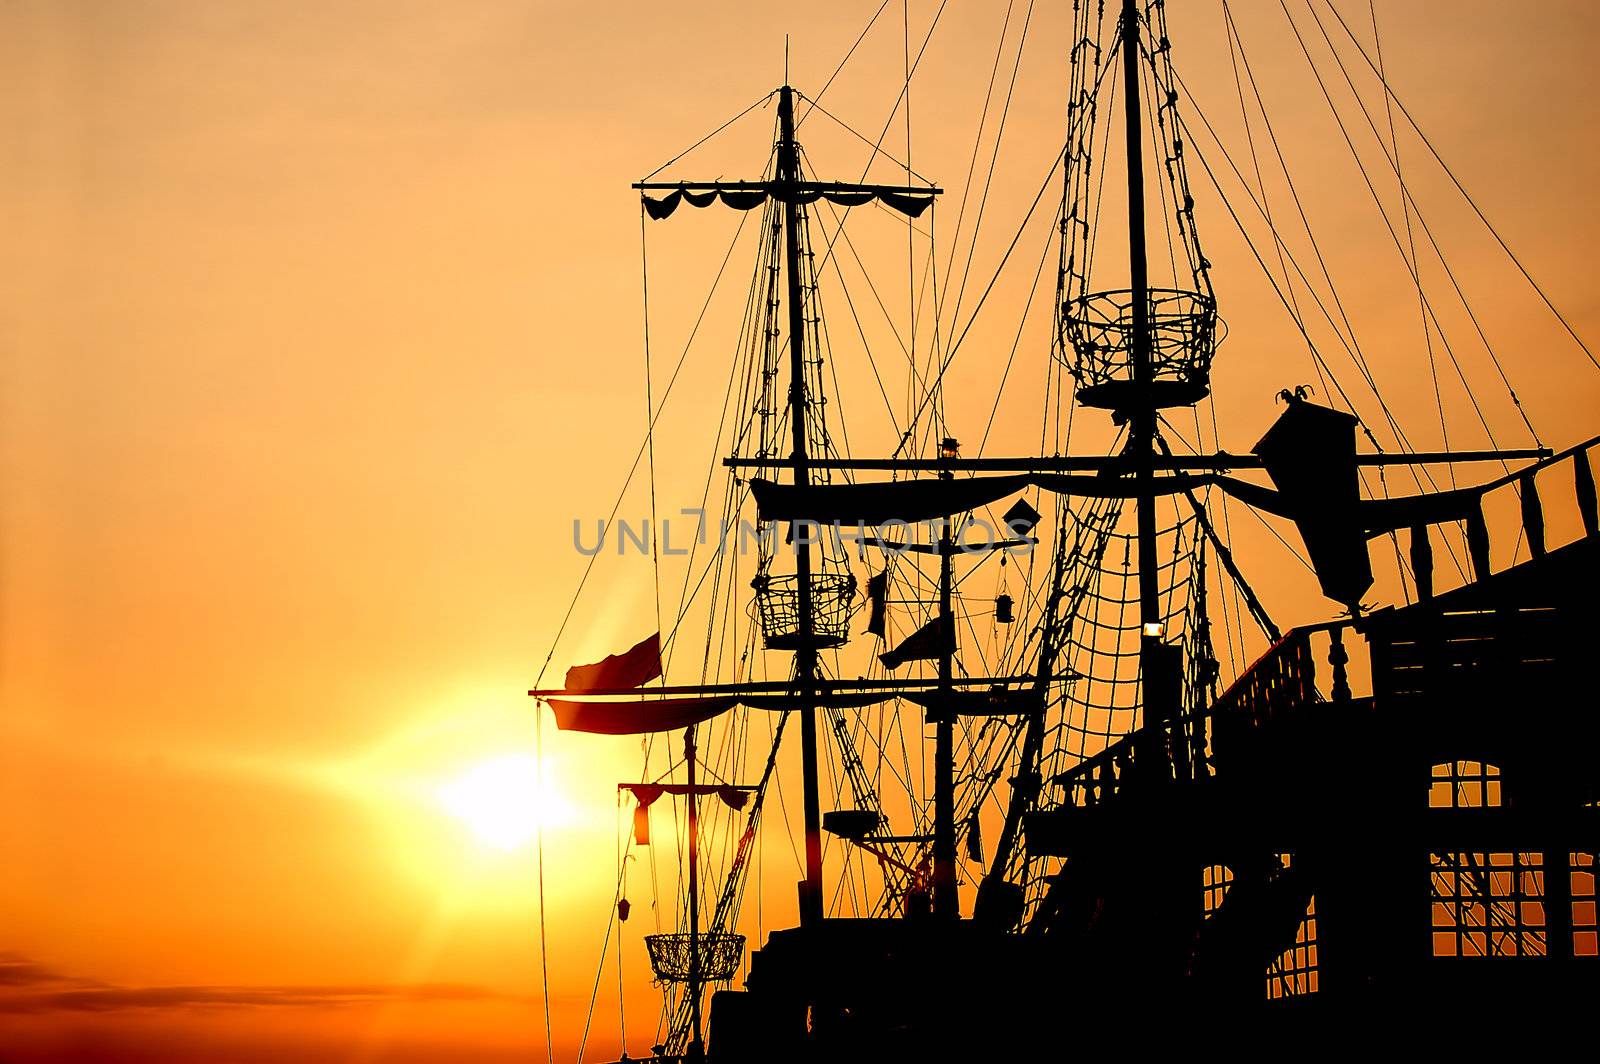 Pirate ship in sunset scenery